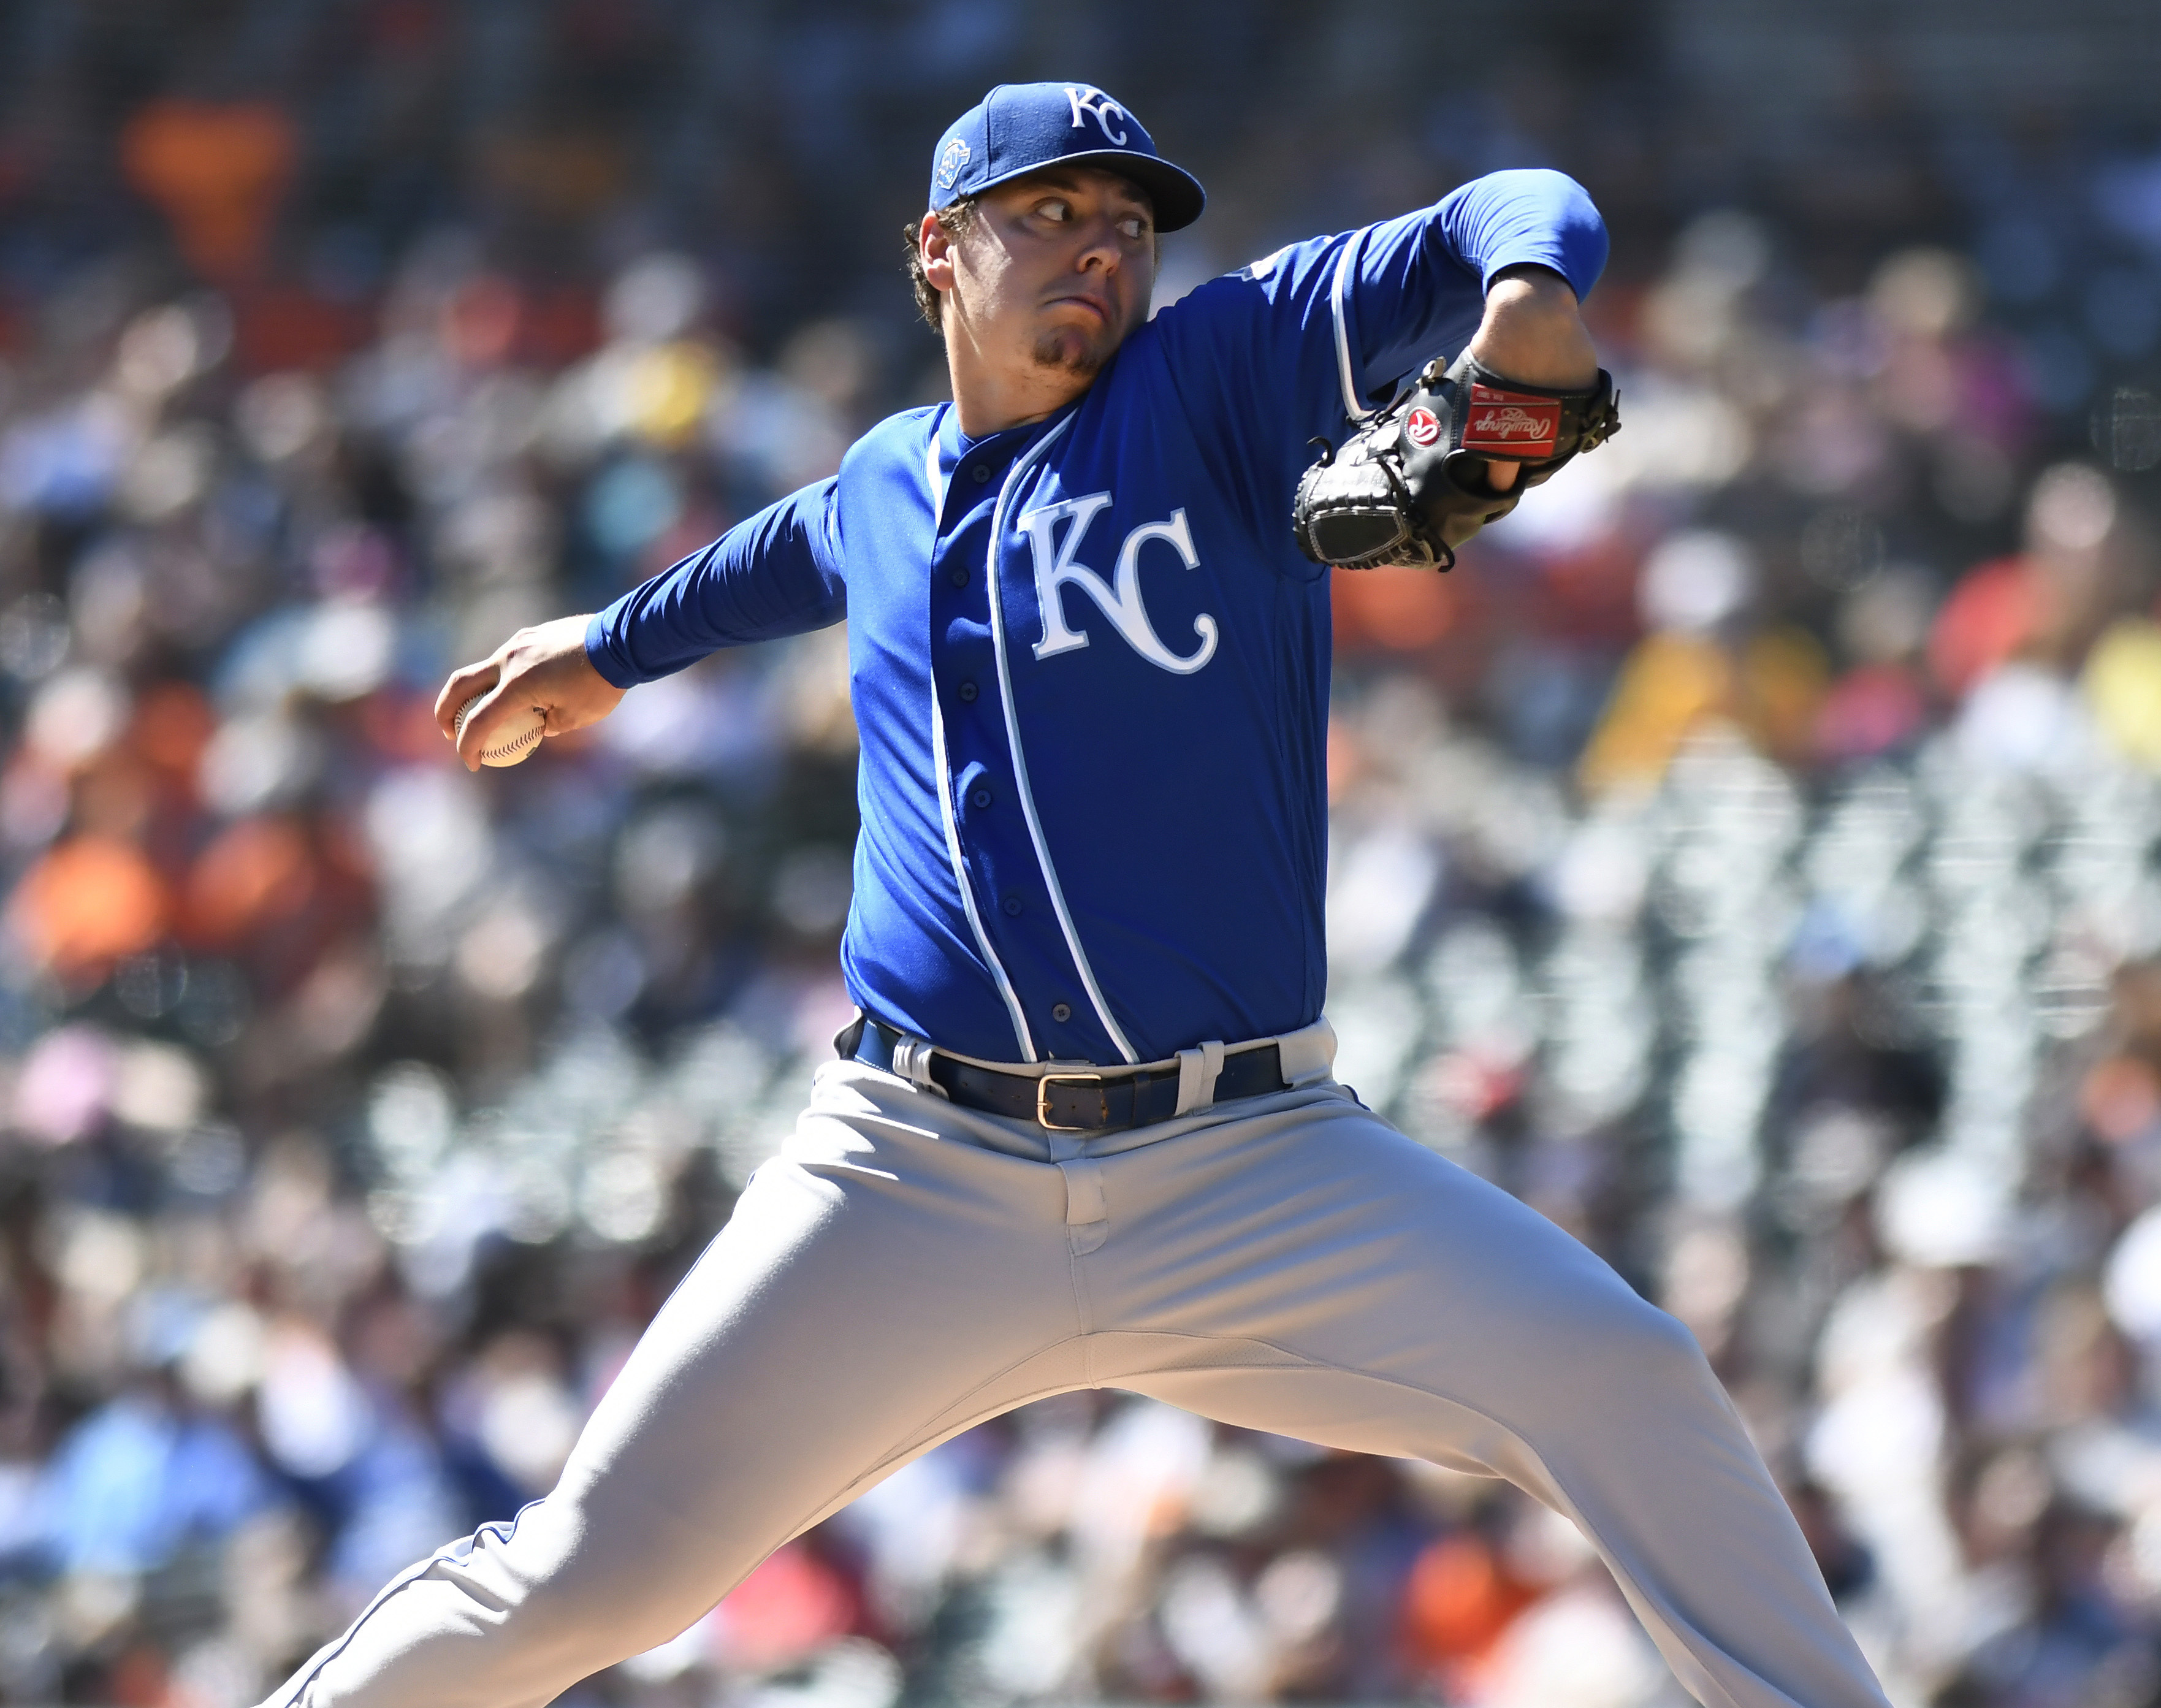 Gallagher, Keller leads Royals to series split with Tigers